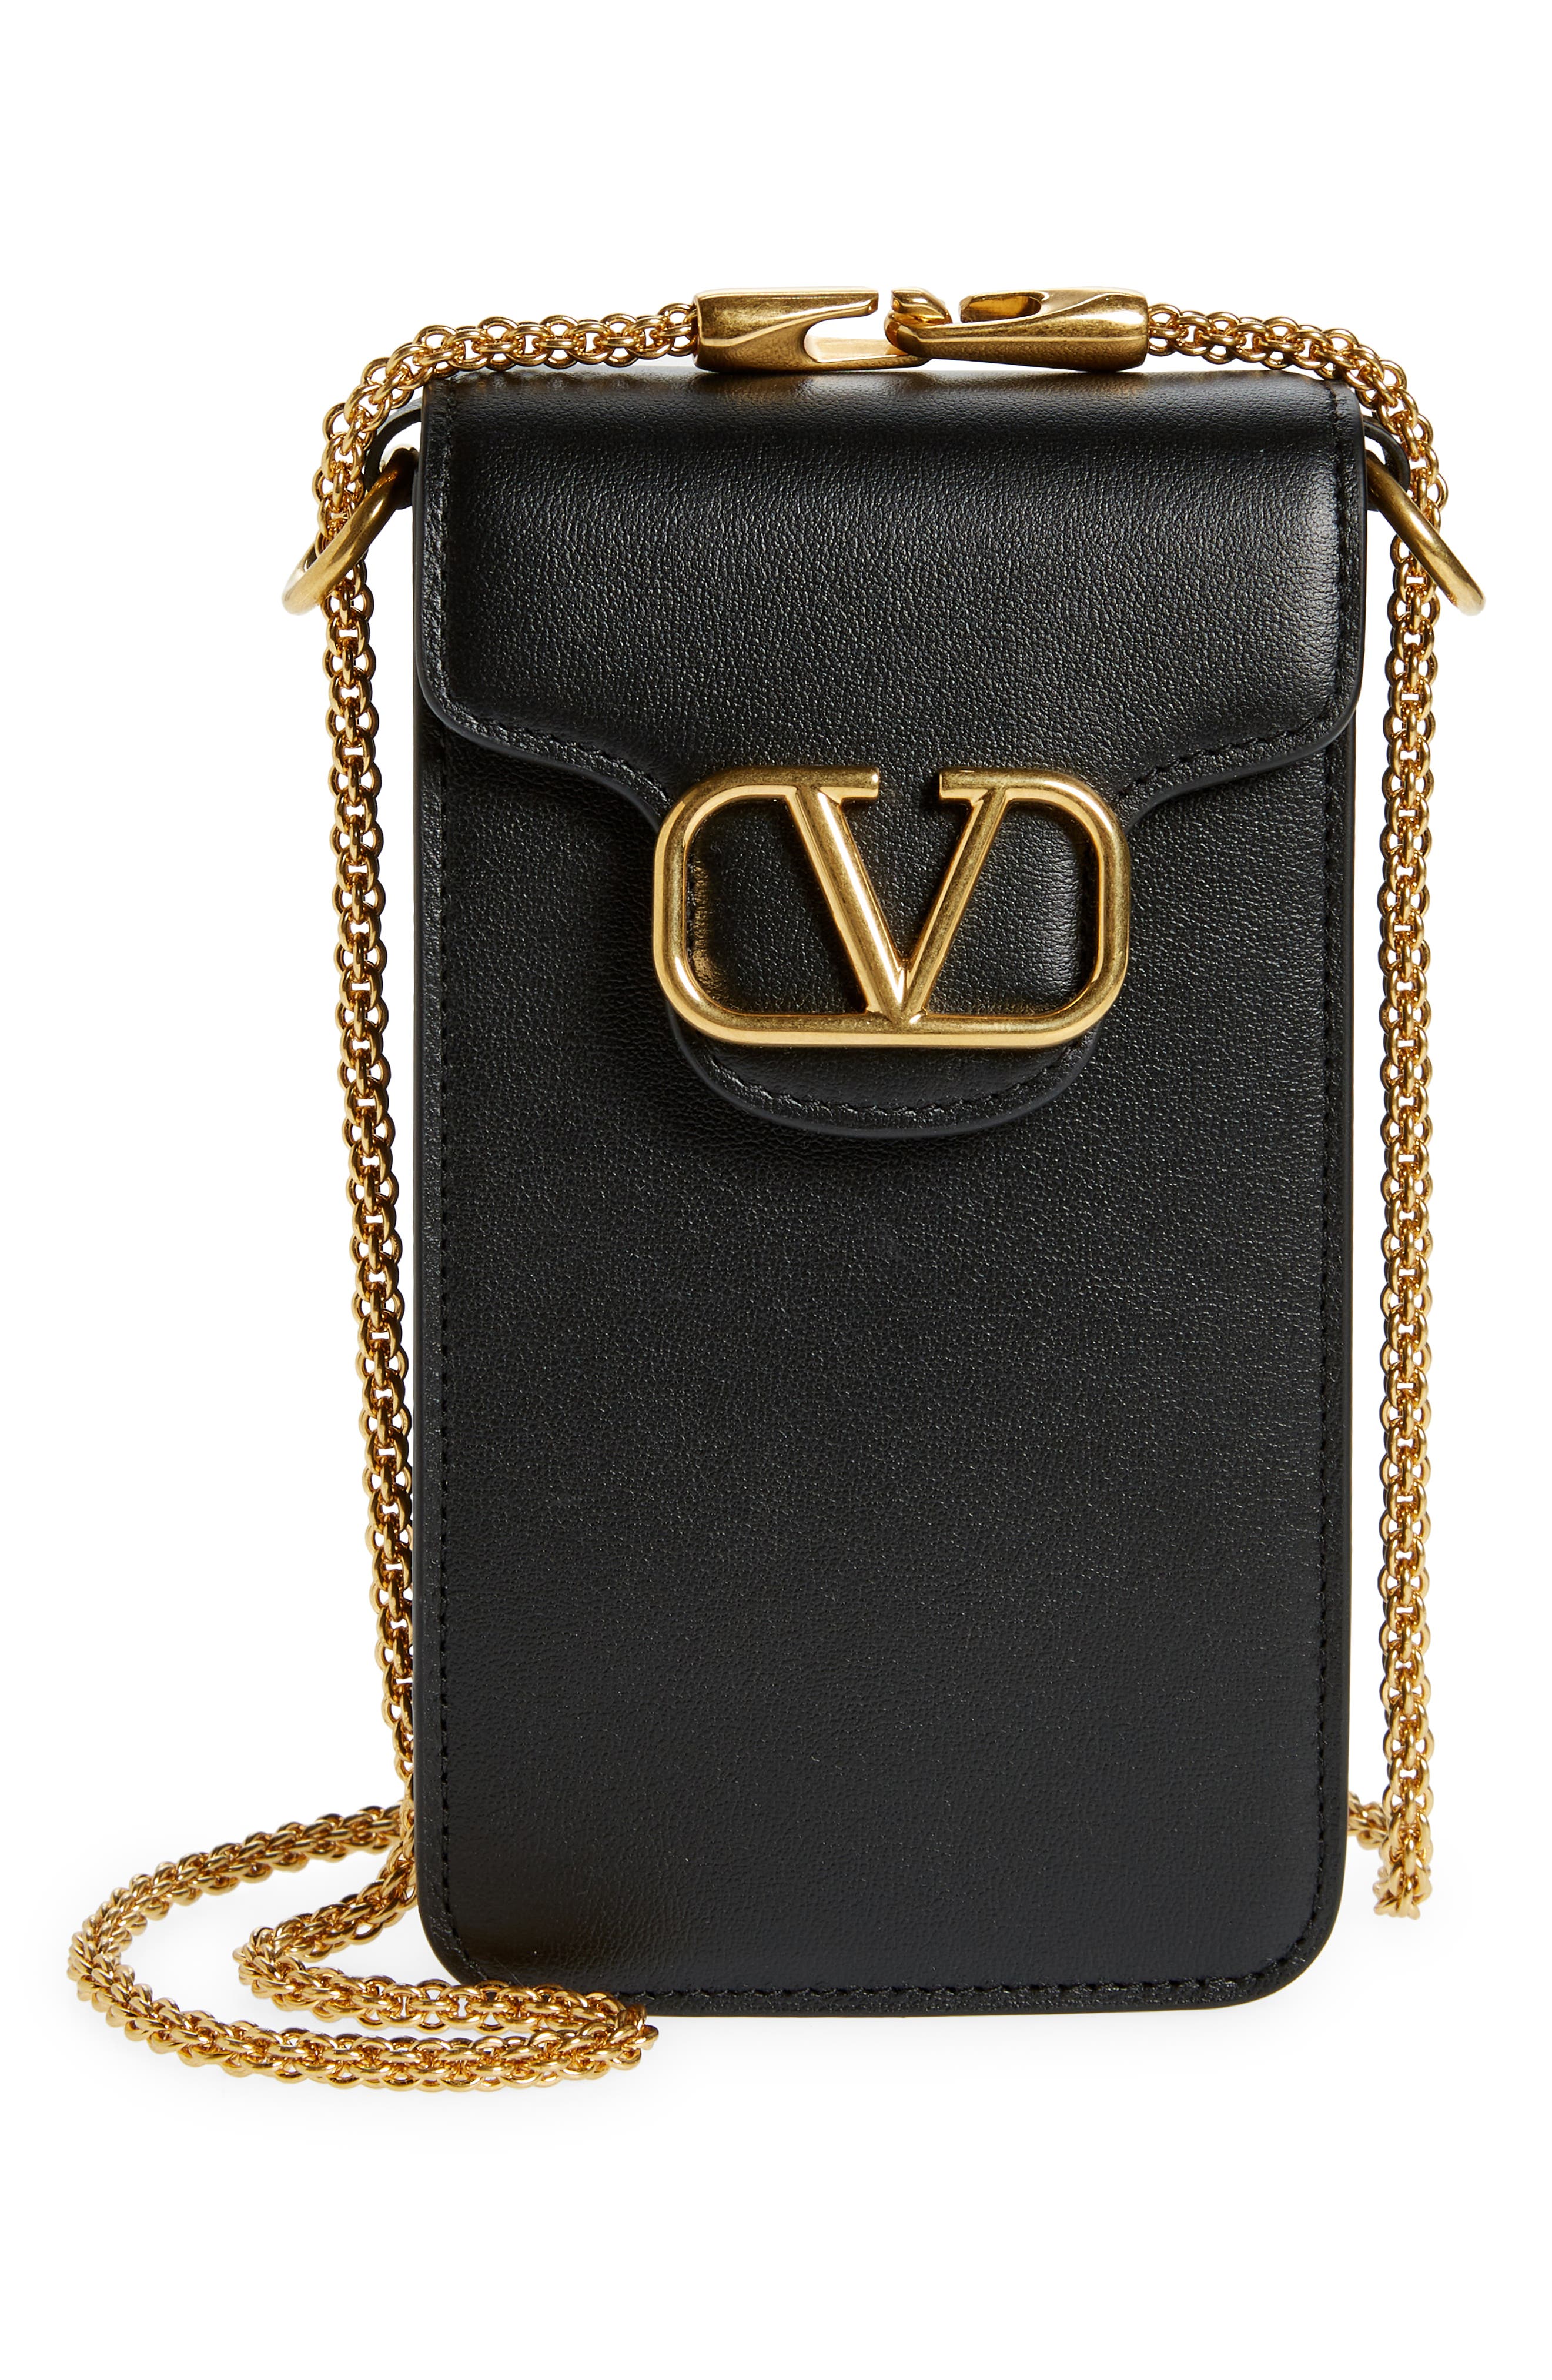 The Week in iPhone Cases: Treat yourself to a designer case from Louis  Vuitton or Valentino